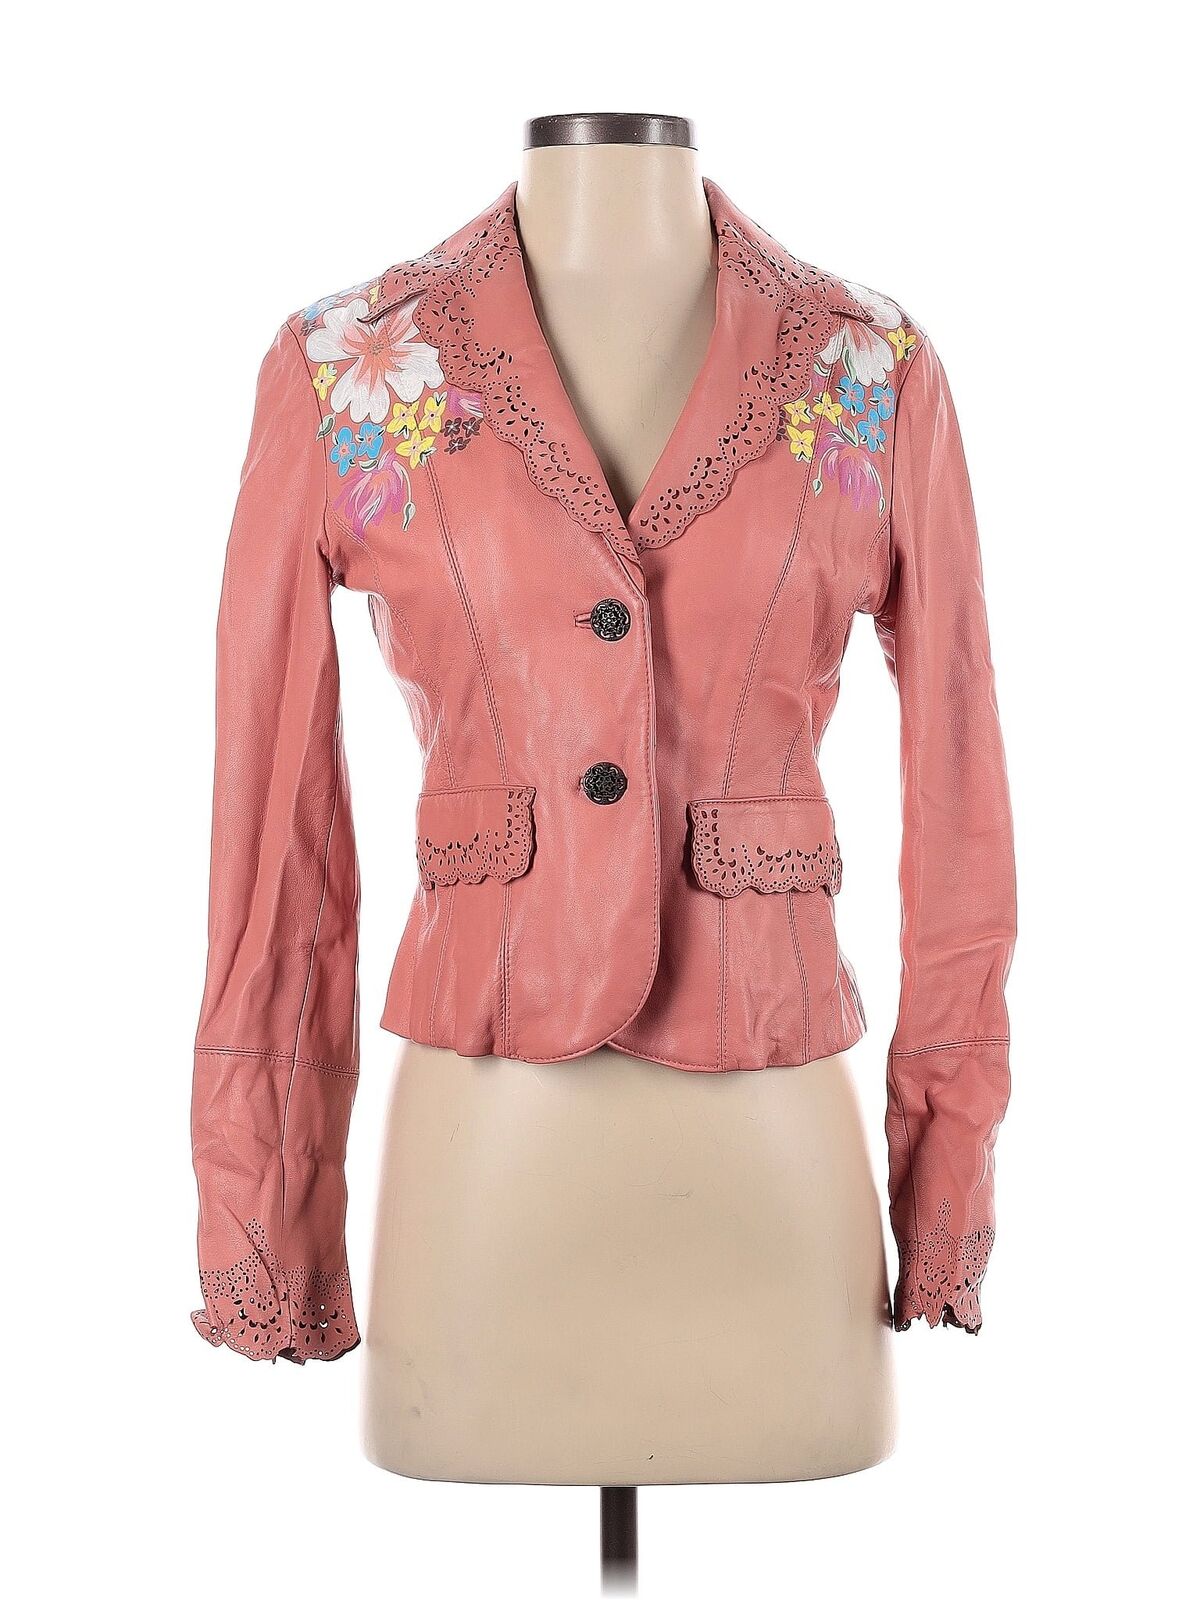 Wilsons Leather Women Pink Leather Jacket XS - image 1